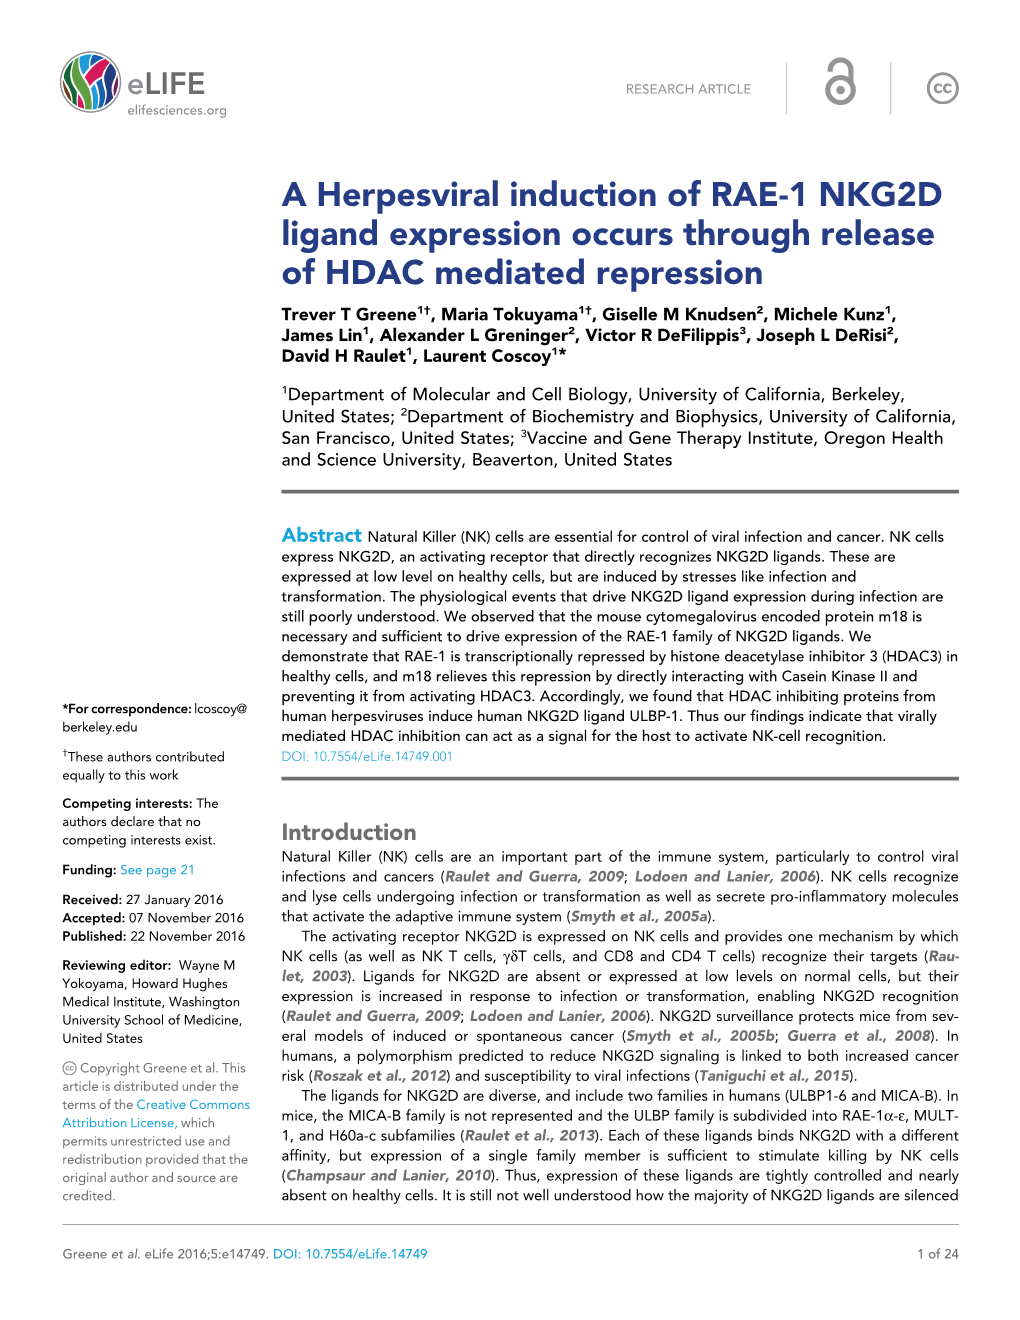 A Herpesviral Induction of RAE-1 NKG2D Ligand Expression